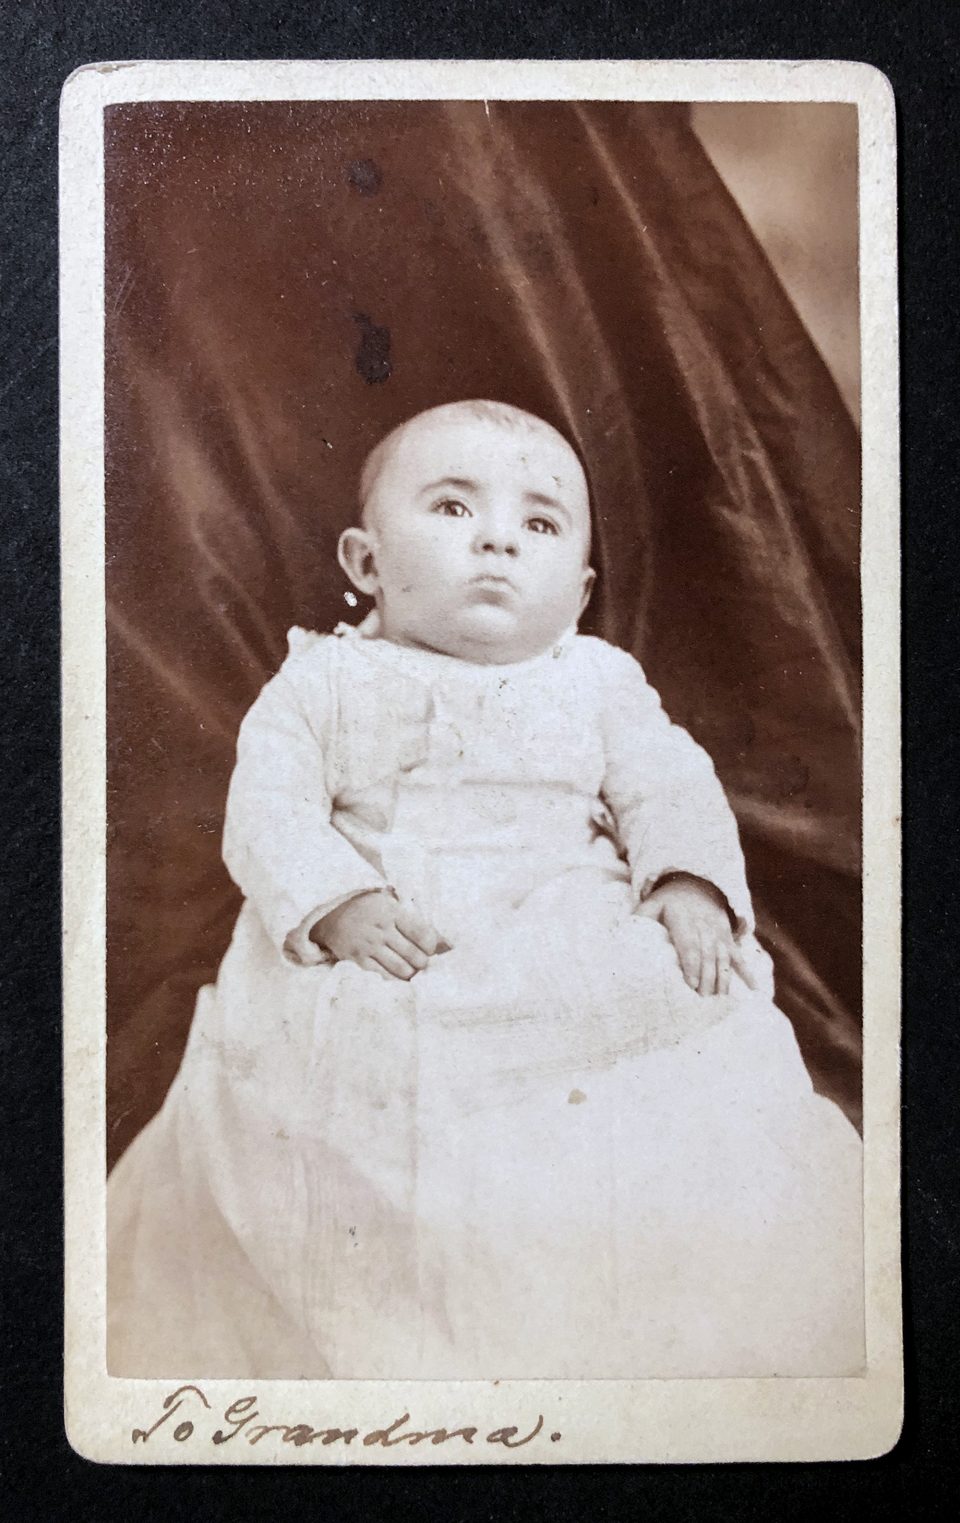 Carte de visite size portrait by John H. Oleson of an infant, inscribed on the bottom edge in pen and ink, "To Grandma." This must have been very special to that grandmother.